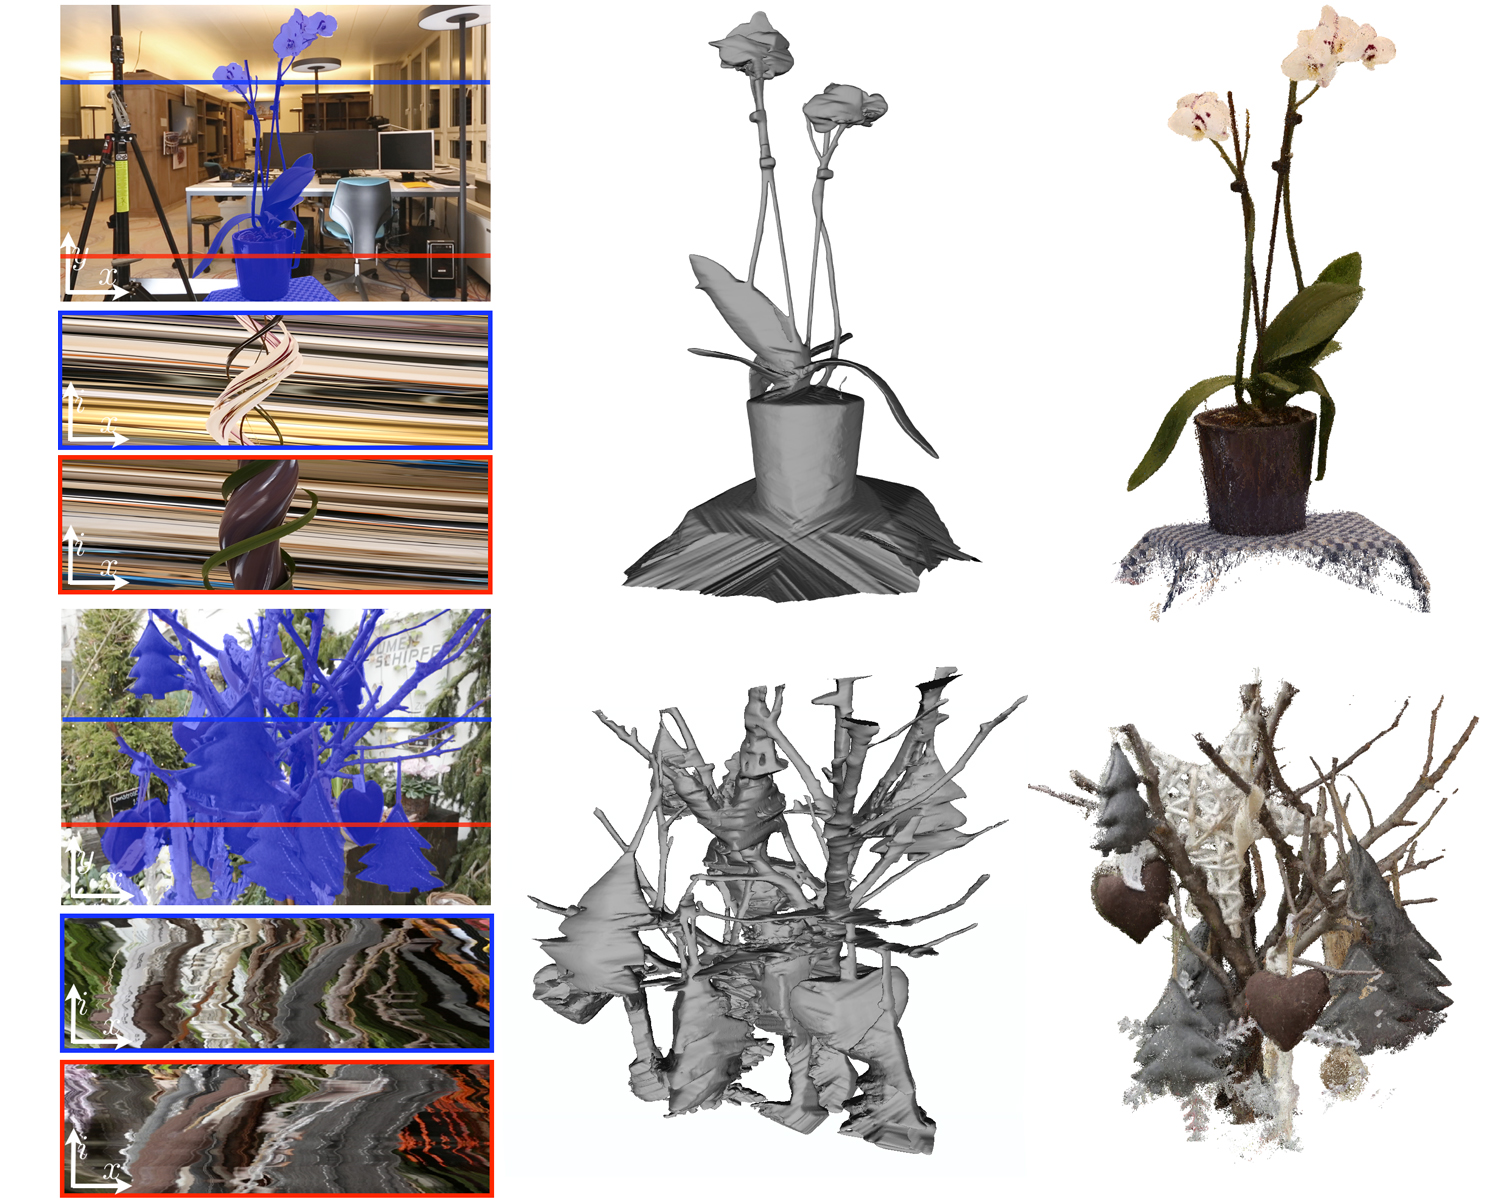 Efficient 3D Object Segmentation from Densely Sampled Light Fields with Applications to 3D Reconstruction